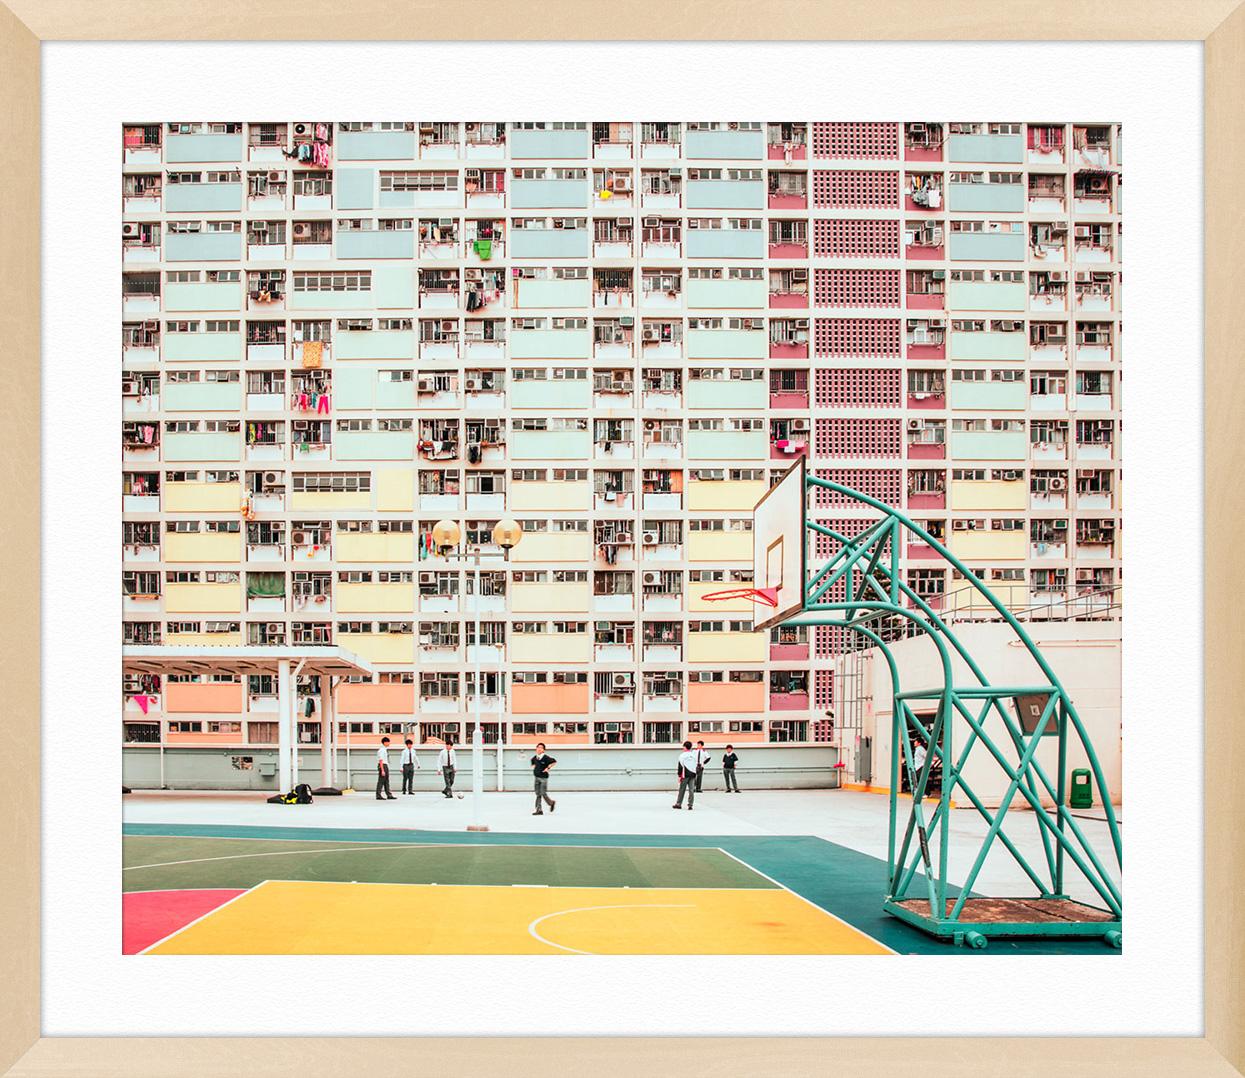 THIS PIECE IS AVAILABLE FRAMED.  Please reach out to the gallery for additional information. 

ABOUT THIS PIECE: French photographer Ludwig Favre recently traveled to Hong Kong. His pictures of China's iconic architecture carry the same romantic